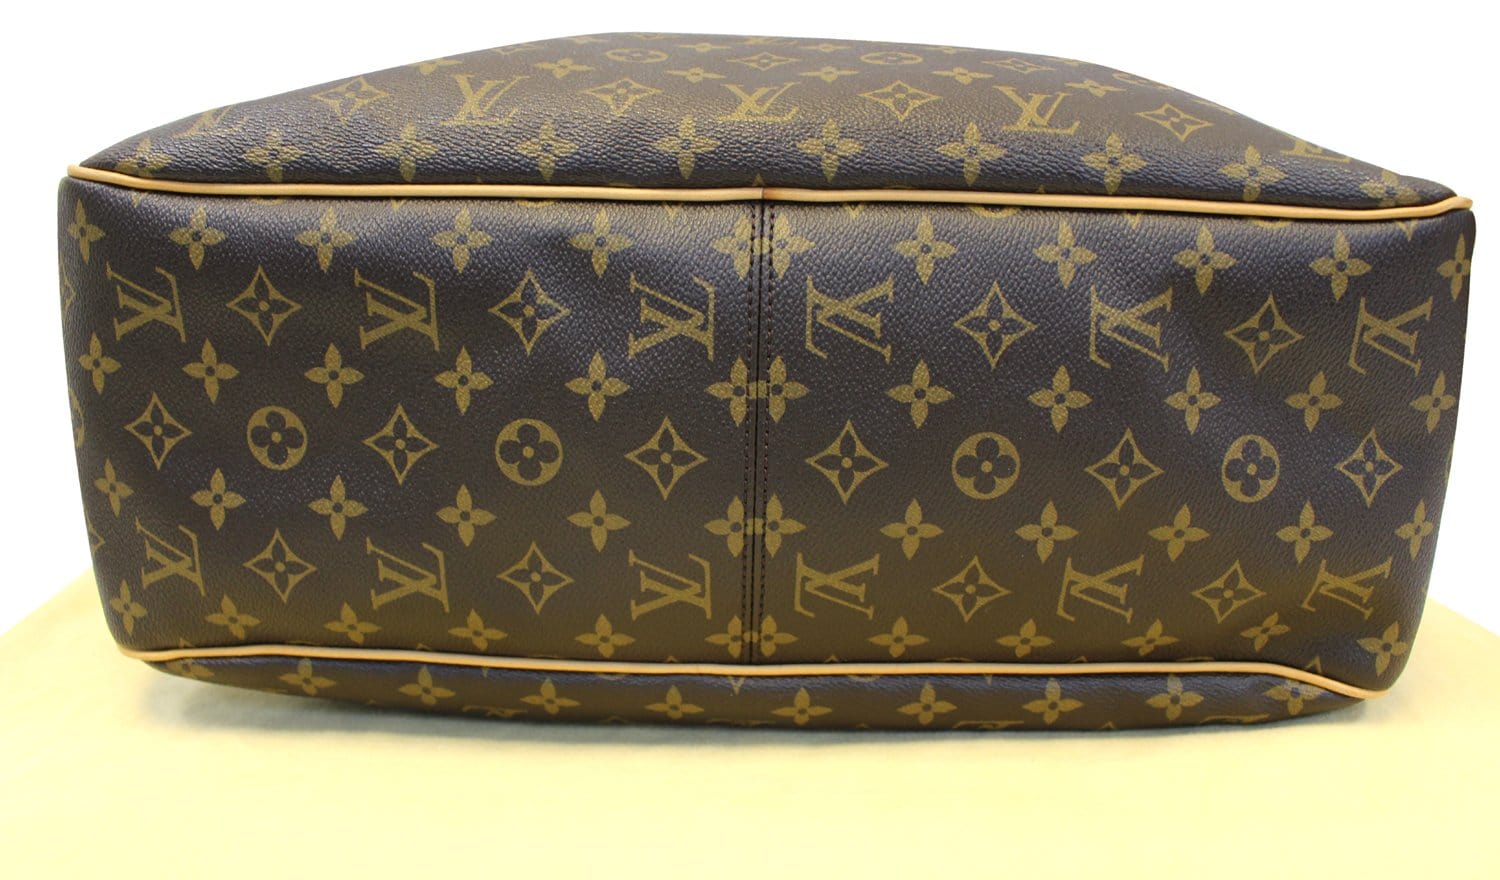 pre owned luxury bags for women louis vuitton